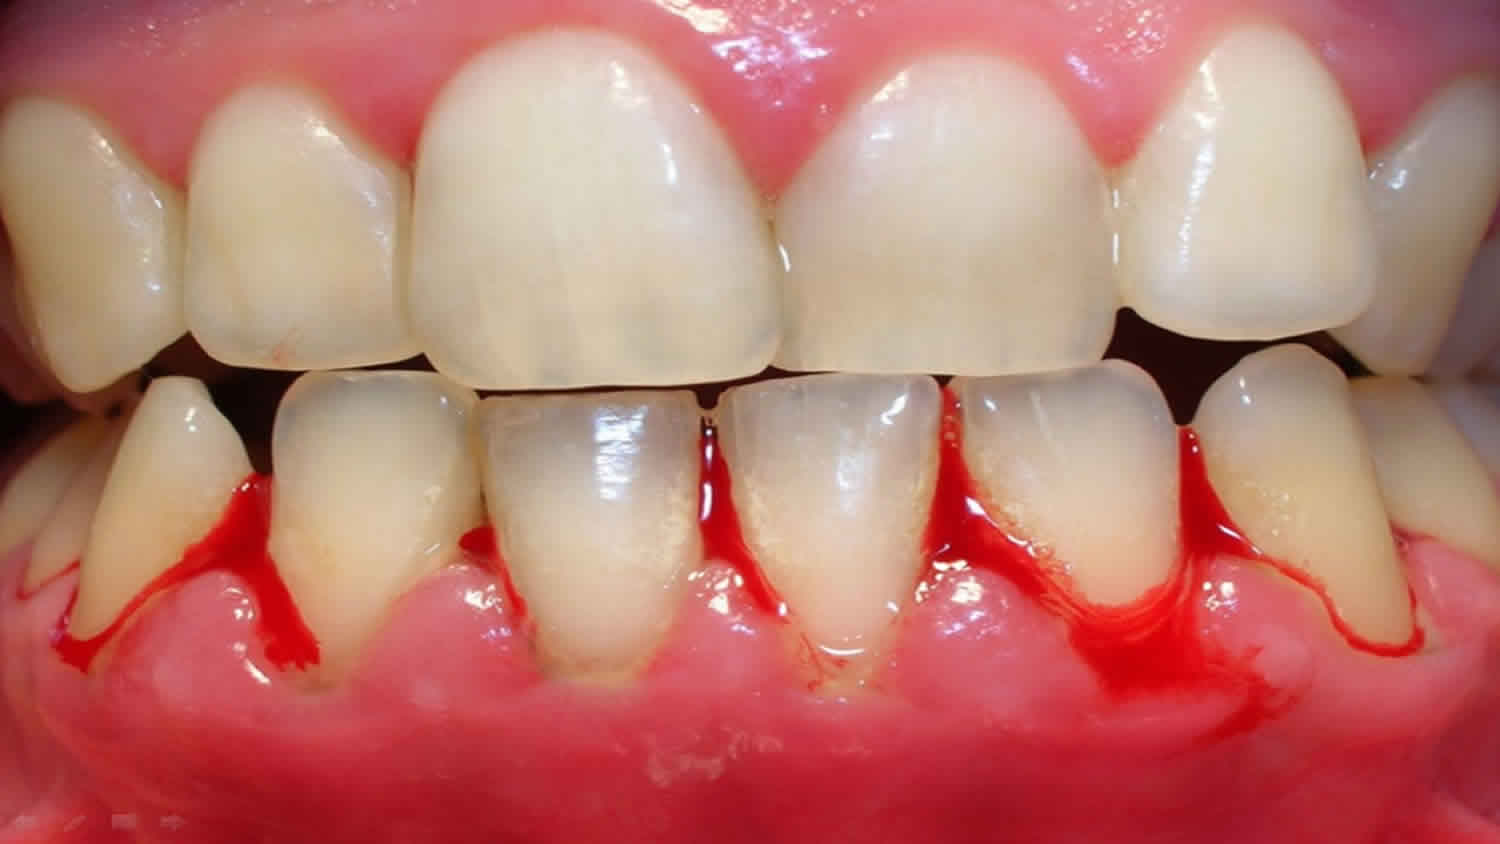 6 Potential Causes of Bleeding Gums